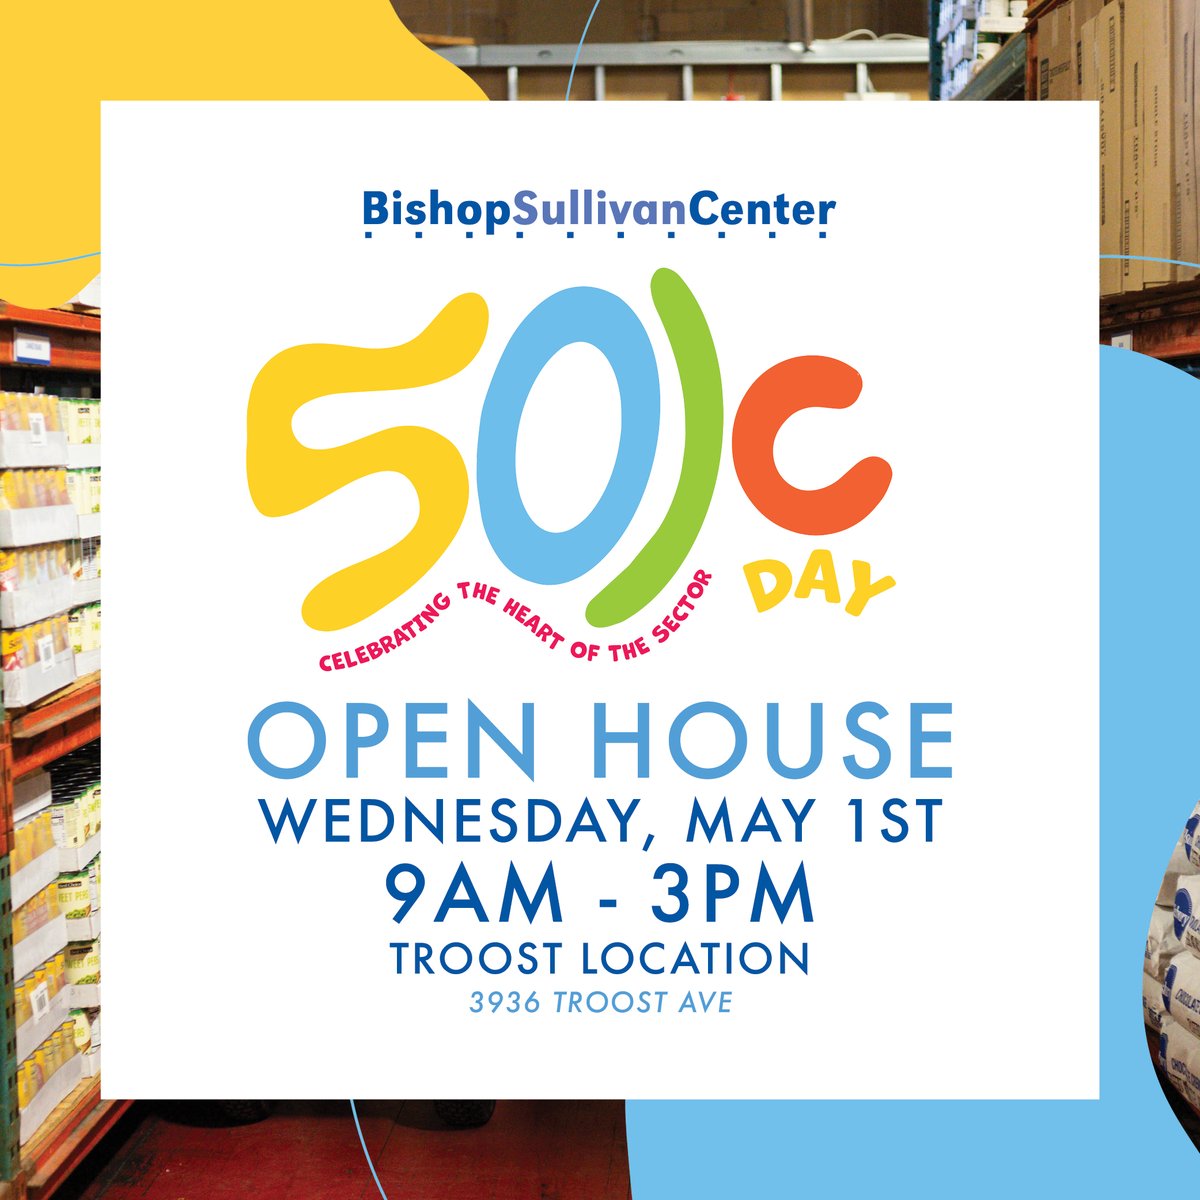 Get to know more about our team, our programs, and the people we serve at our #501c3Day Open House Wednesday, May 1st! Stop by our Troost location between 9am & 3pm. We hope see you there! @npconnect #501cDayKCMO #SupportLocalNonprofits fb.me/e/1N3qwbGYR